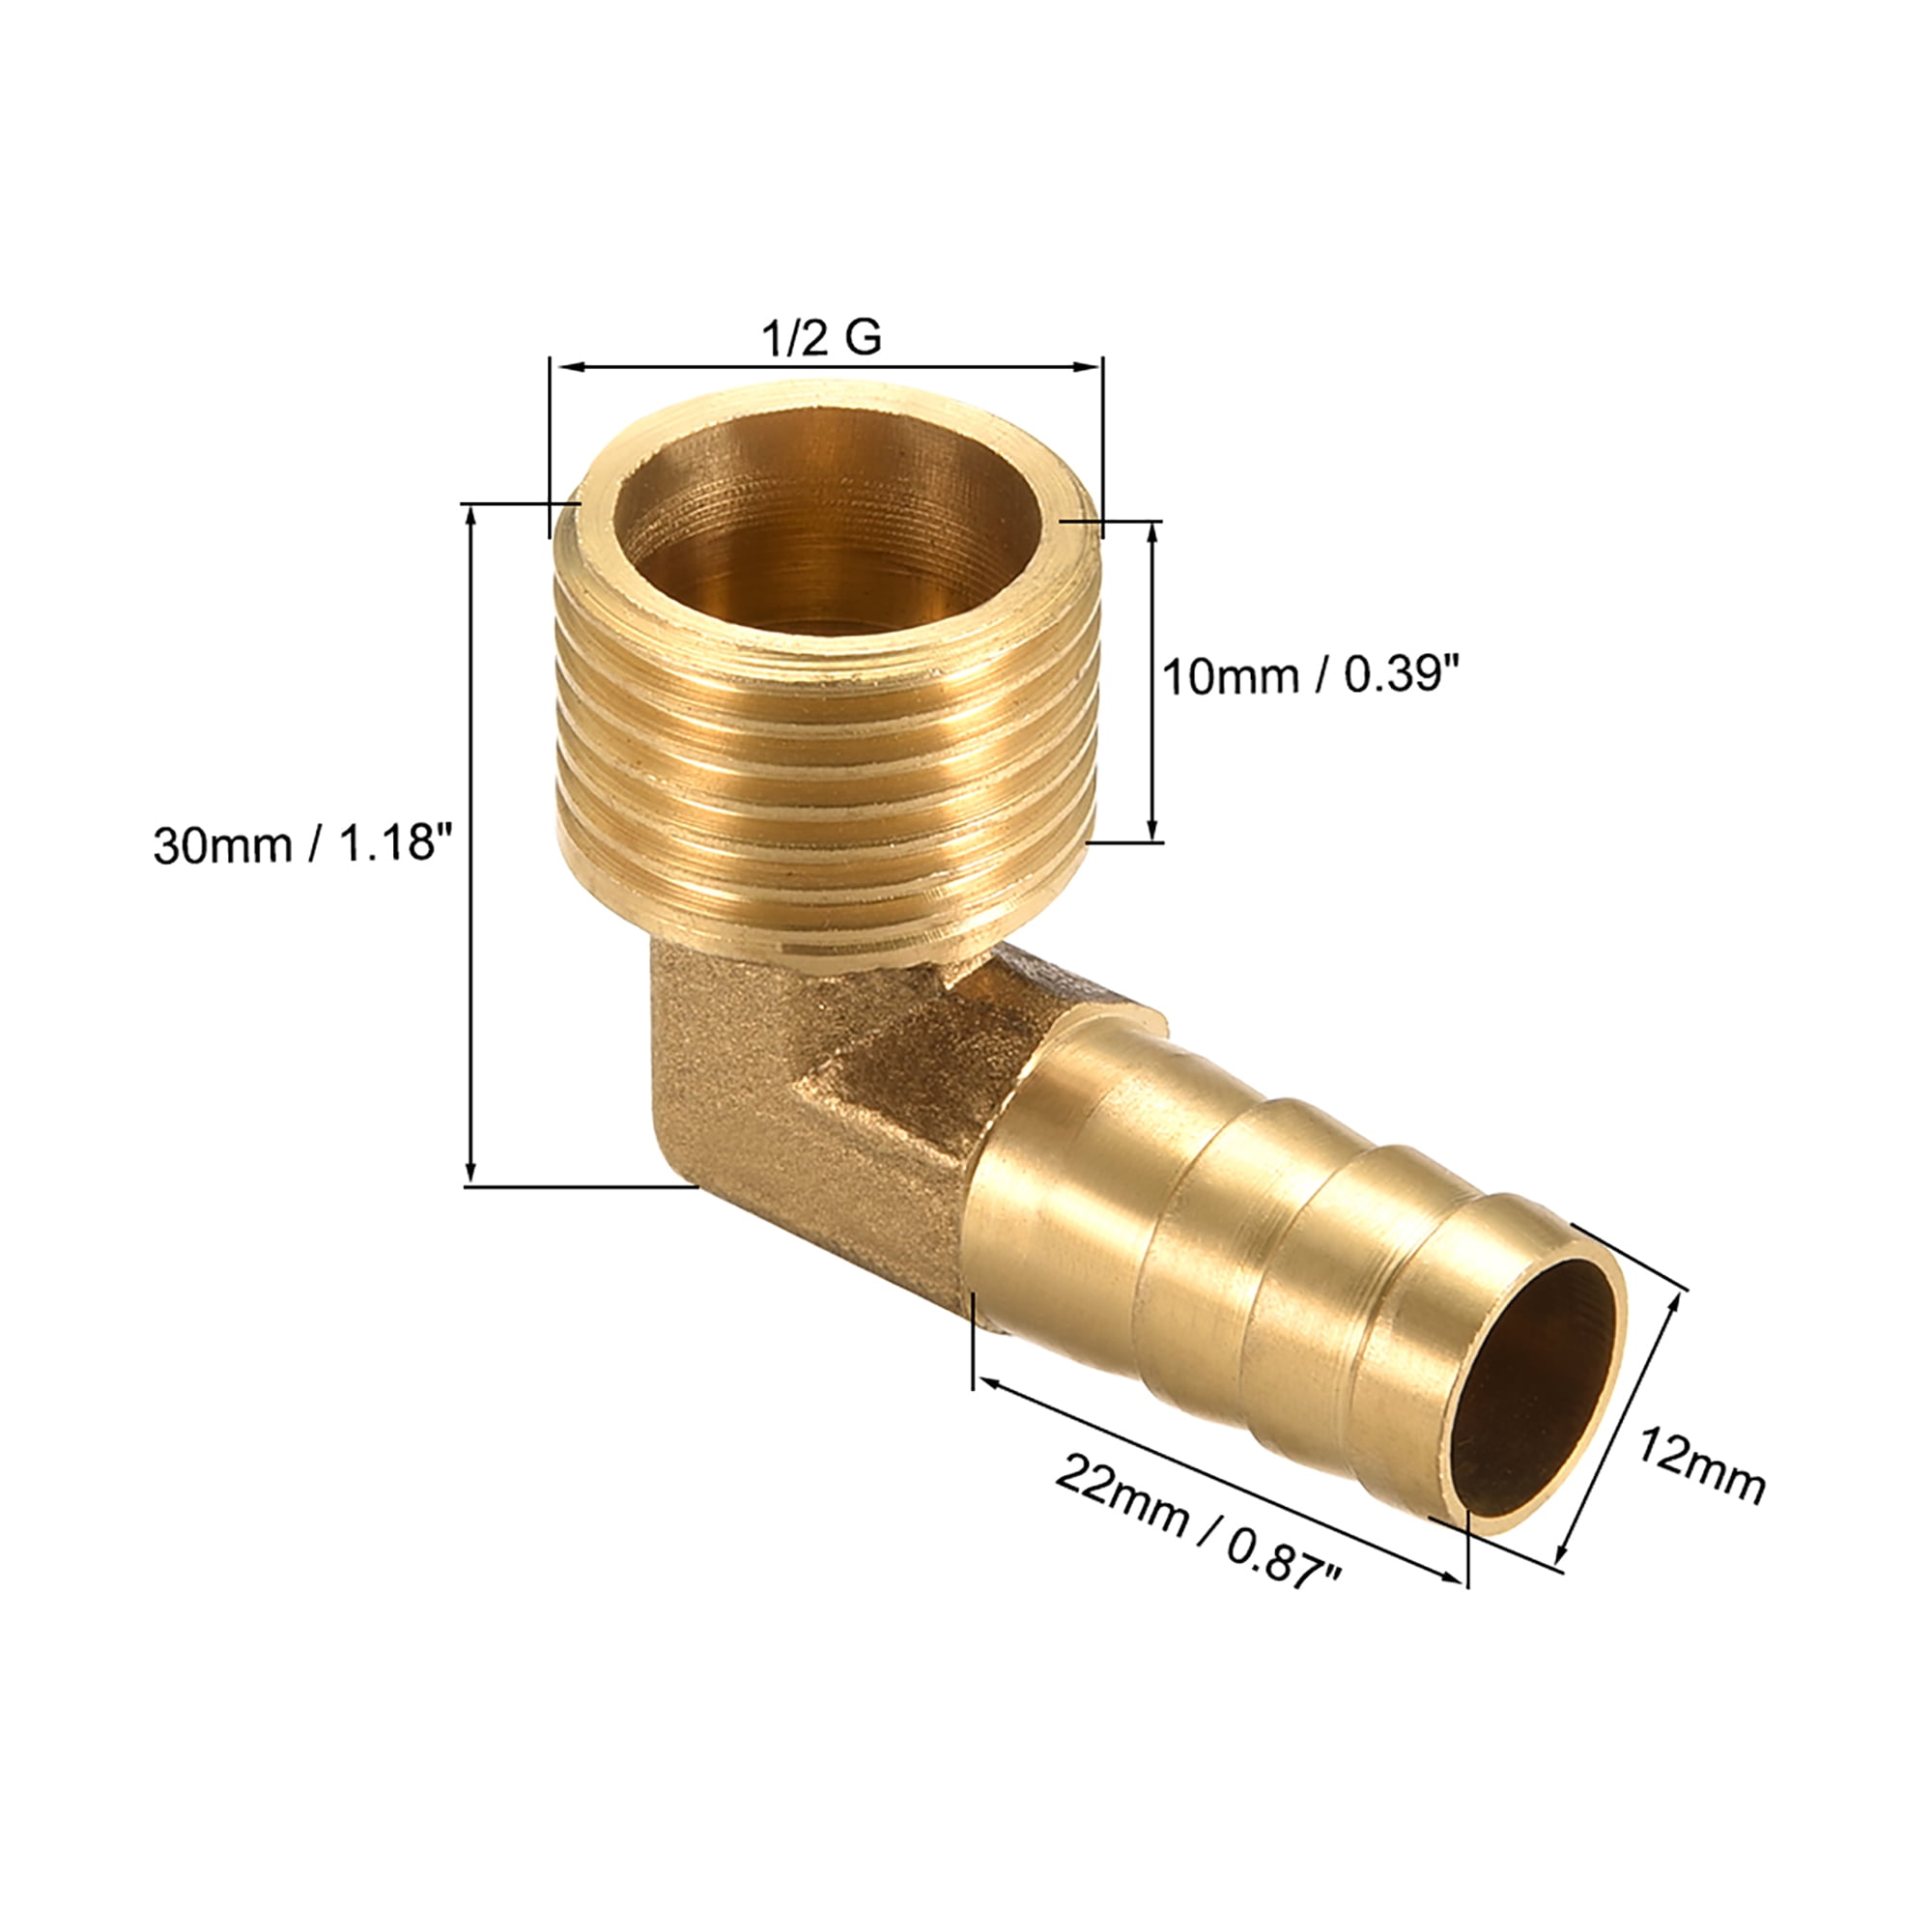 Quality Brass 22mm 90° Elbow  compression plumbing fitting connector. 